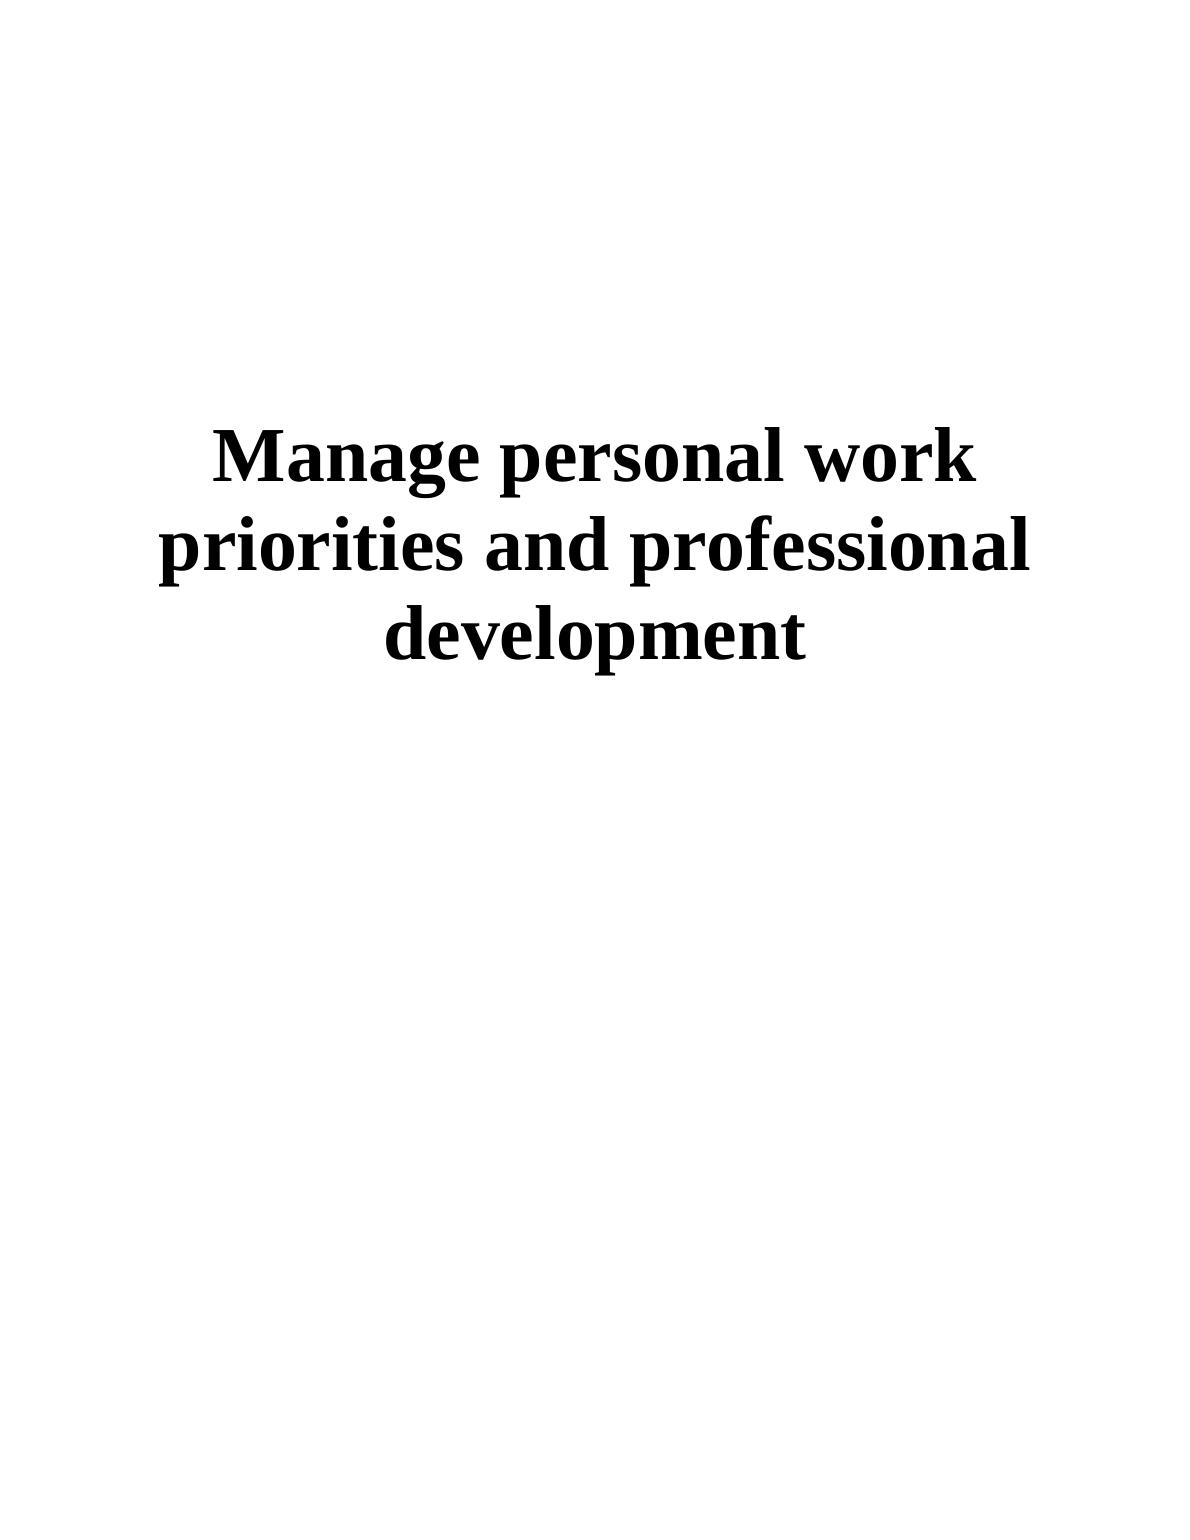 Personal Work Priorities and Professional Development_1